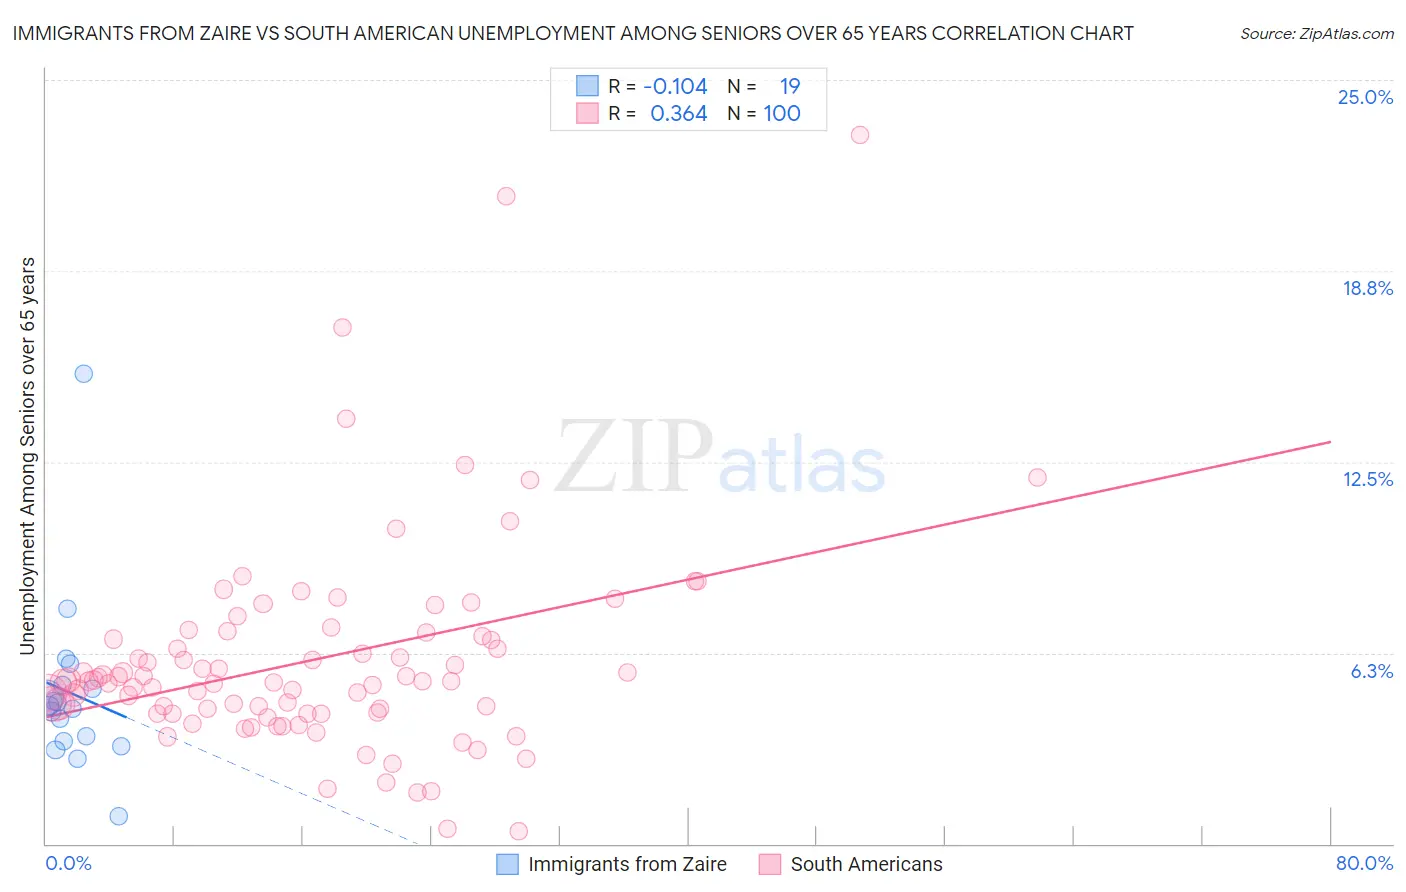 Immigrants from Zaire vs South American Unemployment Among Seniors over 65 years